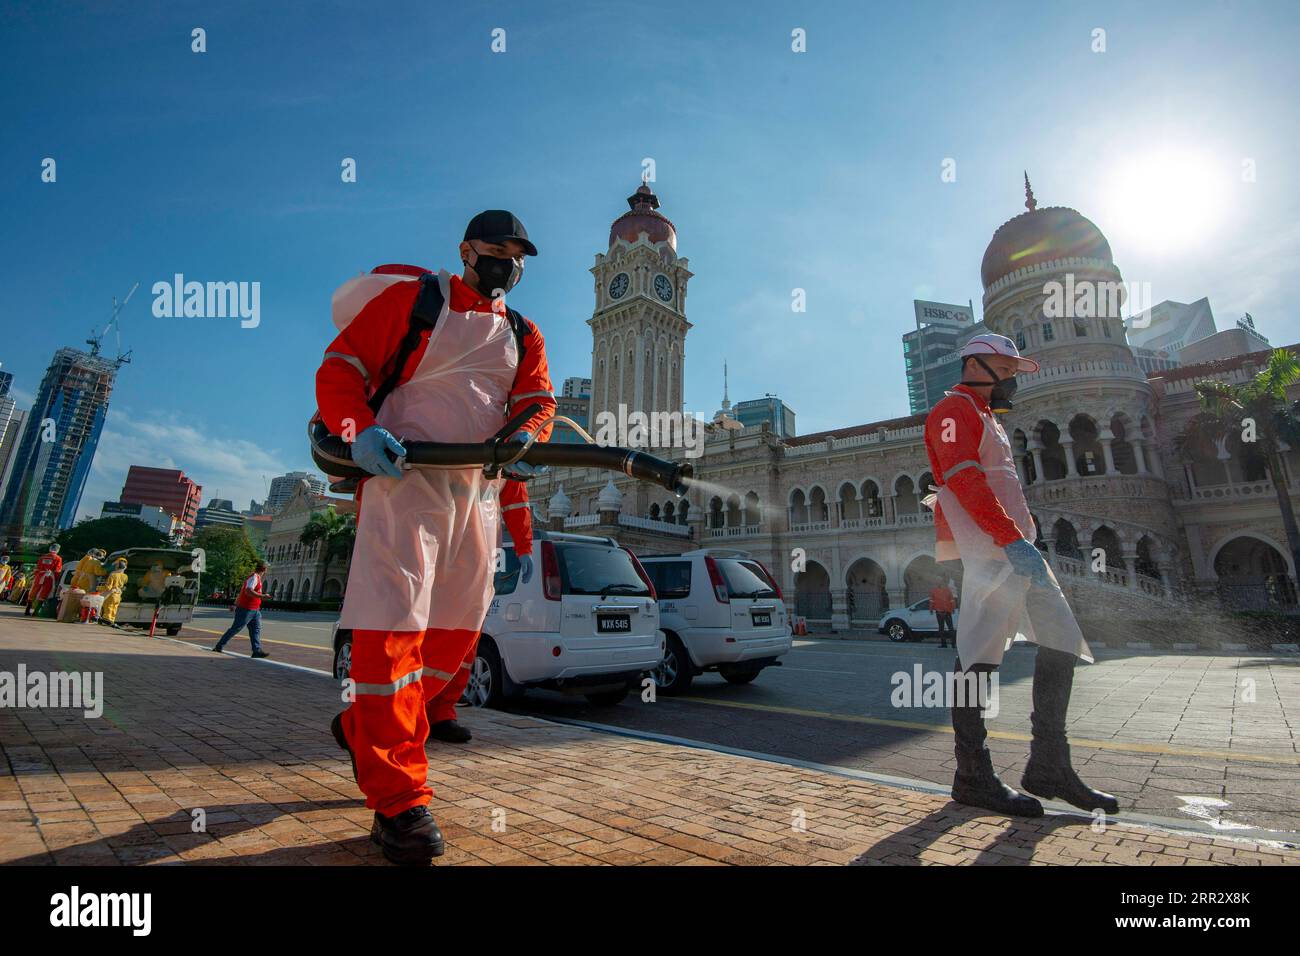 201017 -- KUALA LUMPUR, Oct. 17, 2020 -- Workers spray disinfectant near the Merdeka Square in Kuala Lumpur, Malaysia, Oct. 17, 2020. Malaysia reported 869 new COVID-19 infections in the highest daily spike since the outbreak, the Health Ministry said on Saturday, bringing the national total to 19,627. Photo by /Xinhua MALAYSIA-KUALA LUMPUR-COVID-19 ChongxVoonxChung PUBLICATIONxNOTxINxCHN Stock Photo